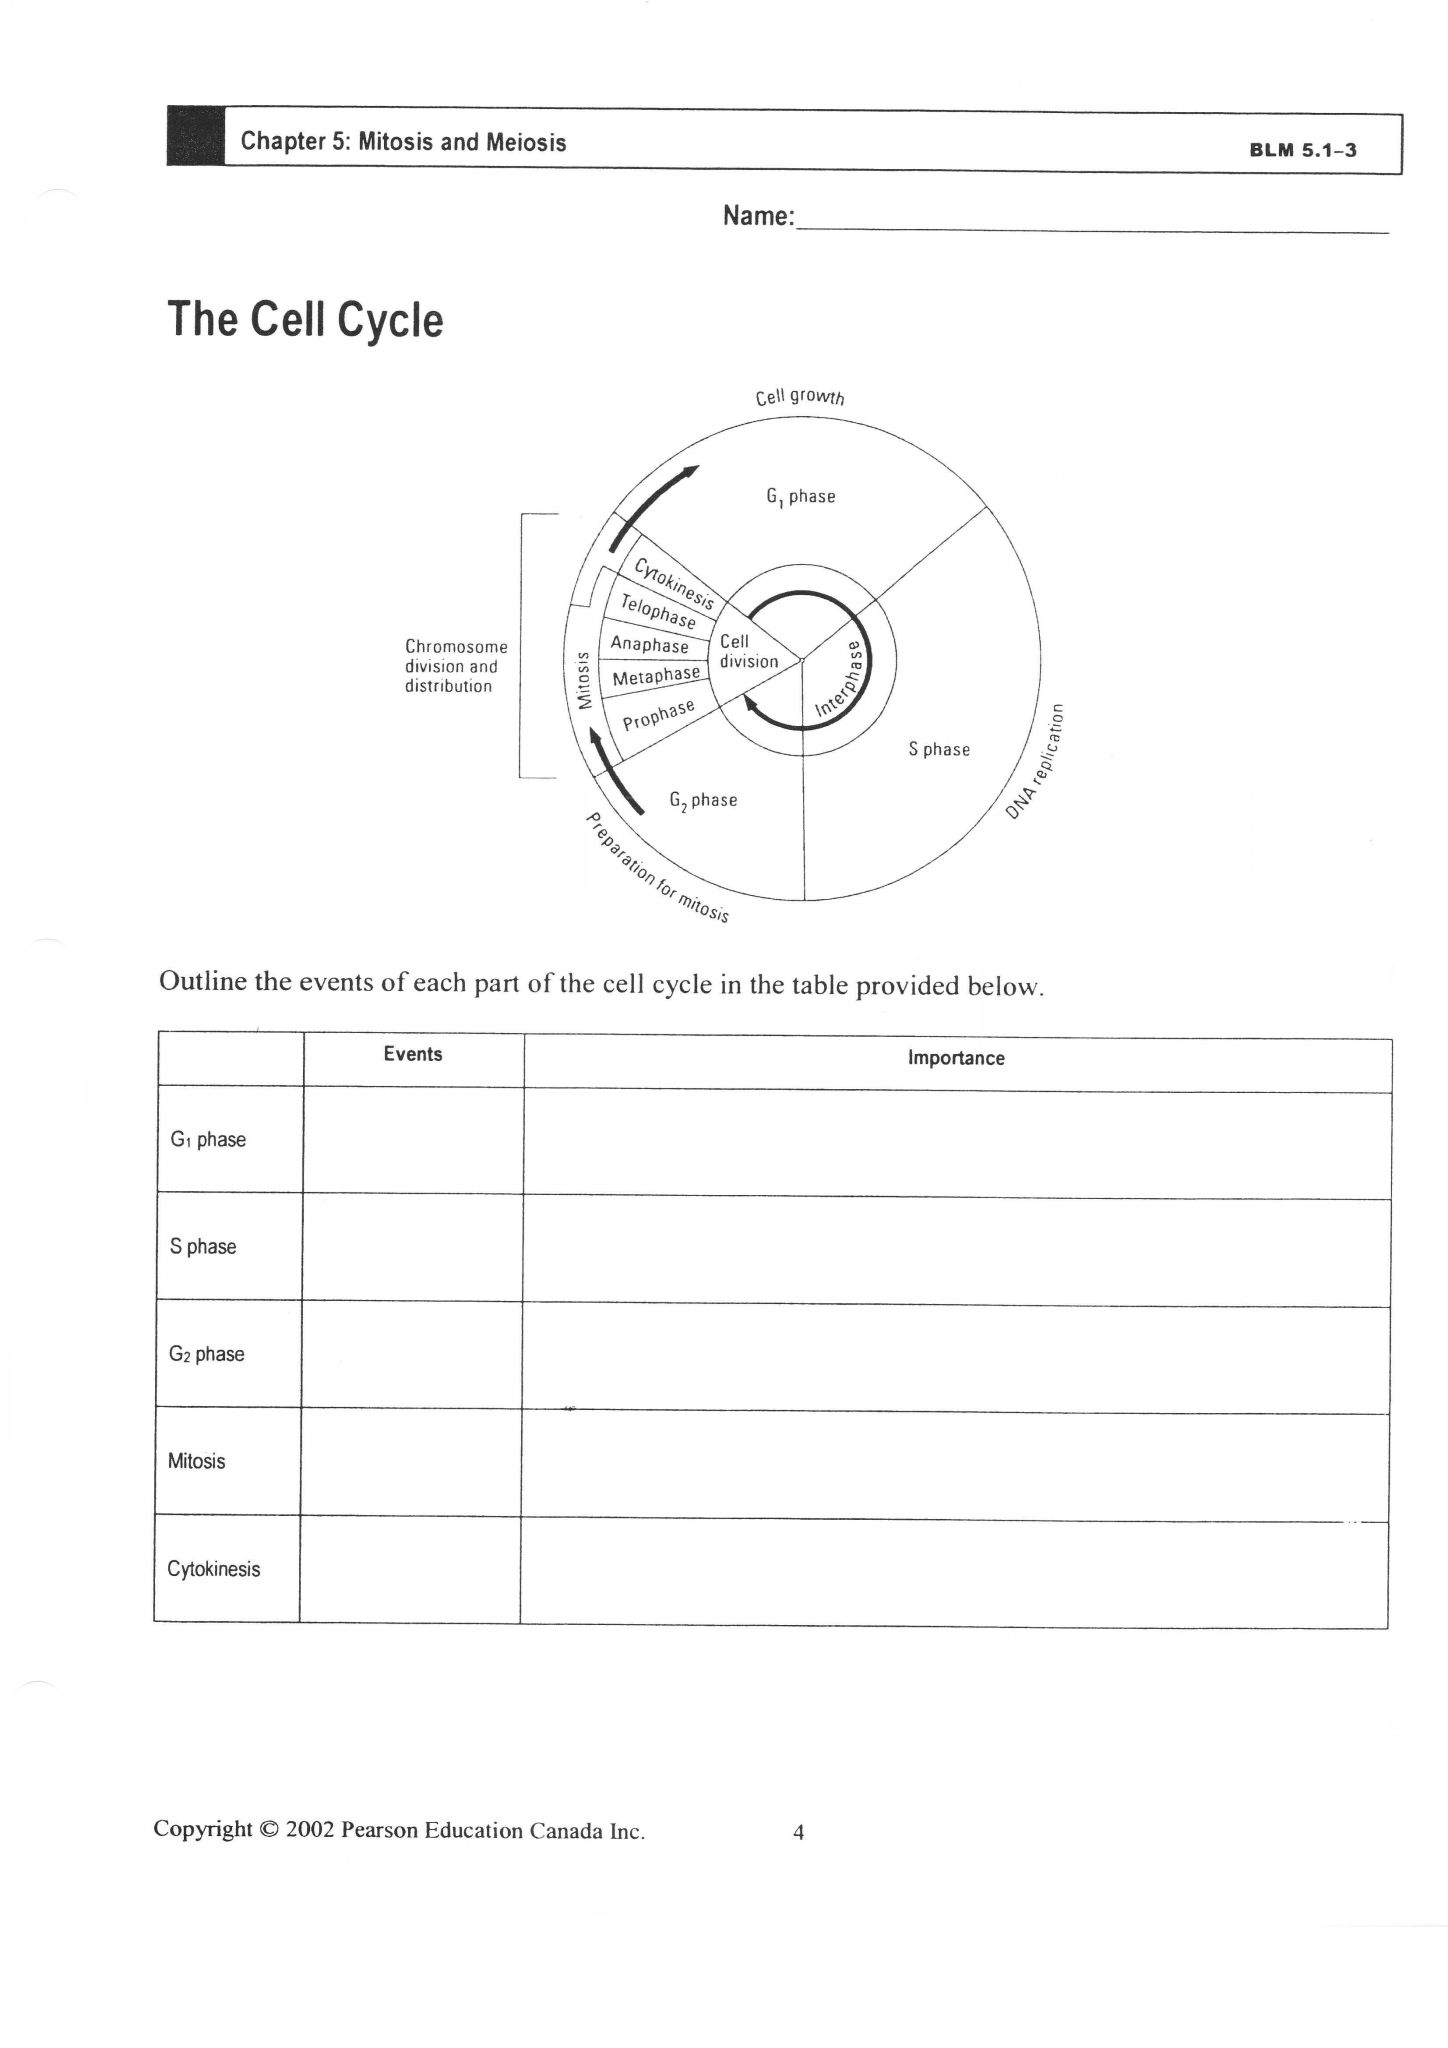 The Cell Cycle Coloring Worksheet Answers and the Cell Cycle Coloring Worksheet Answer Key Breadandhearth